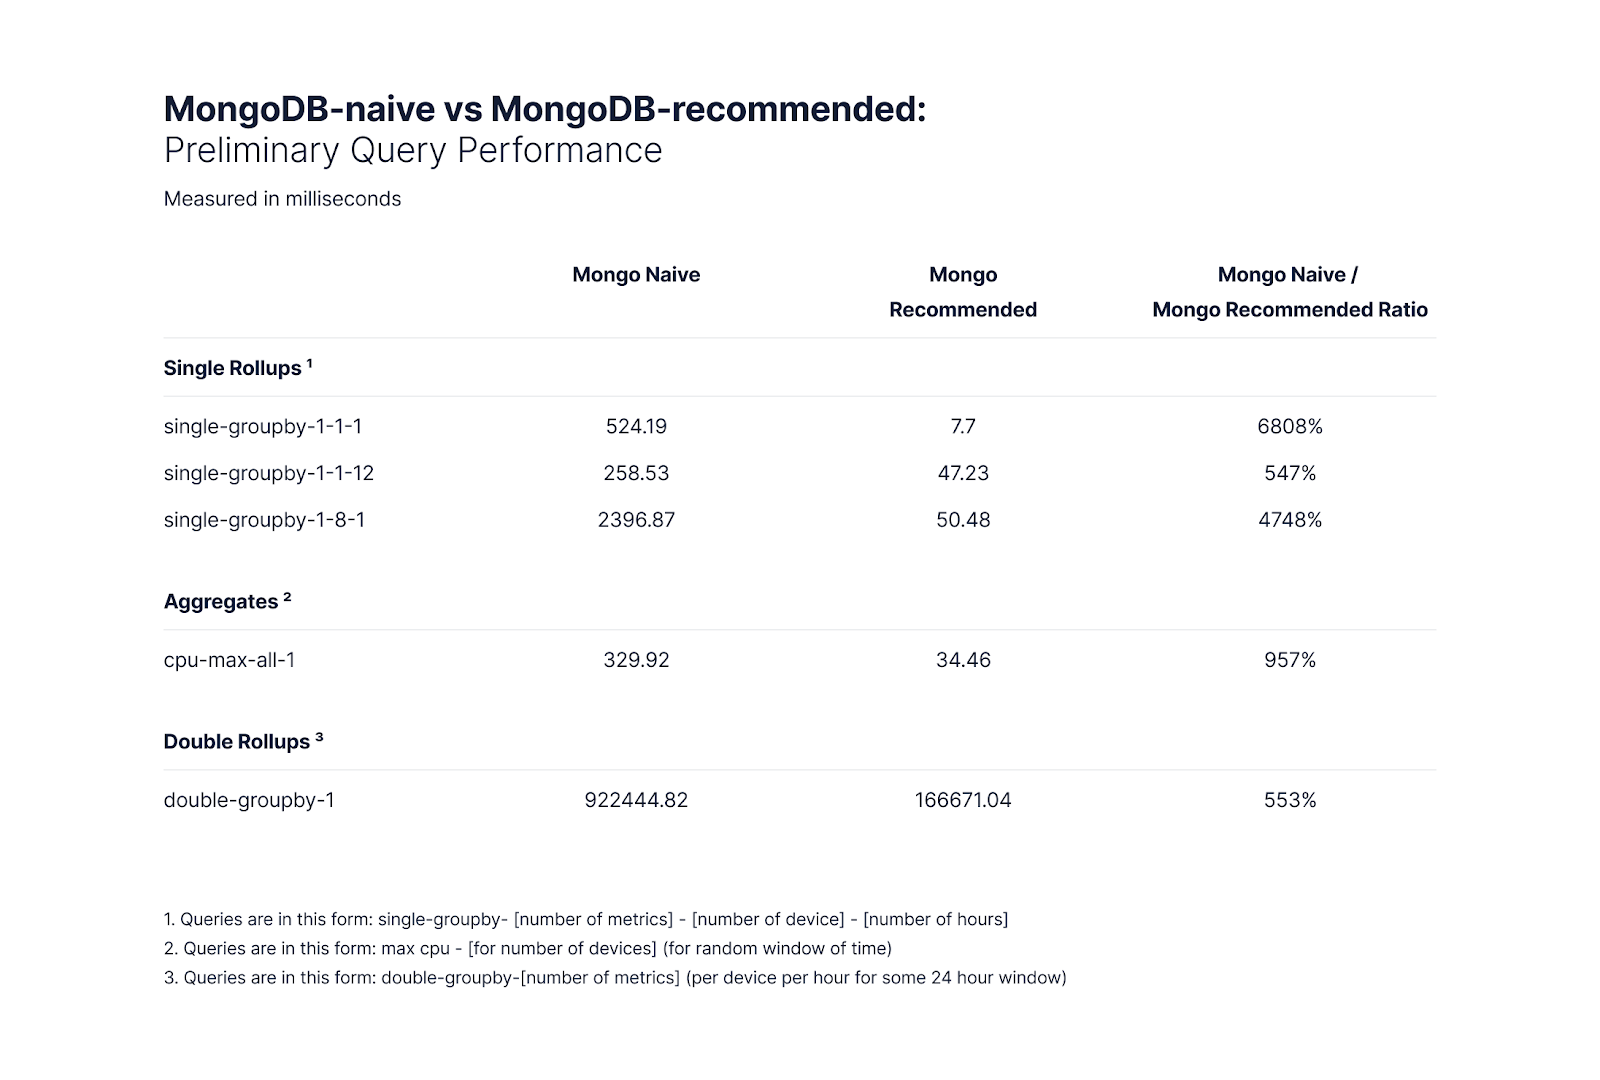 Mongo-recommended out performs Mongo-naive by 5x-68x depending on the query.